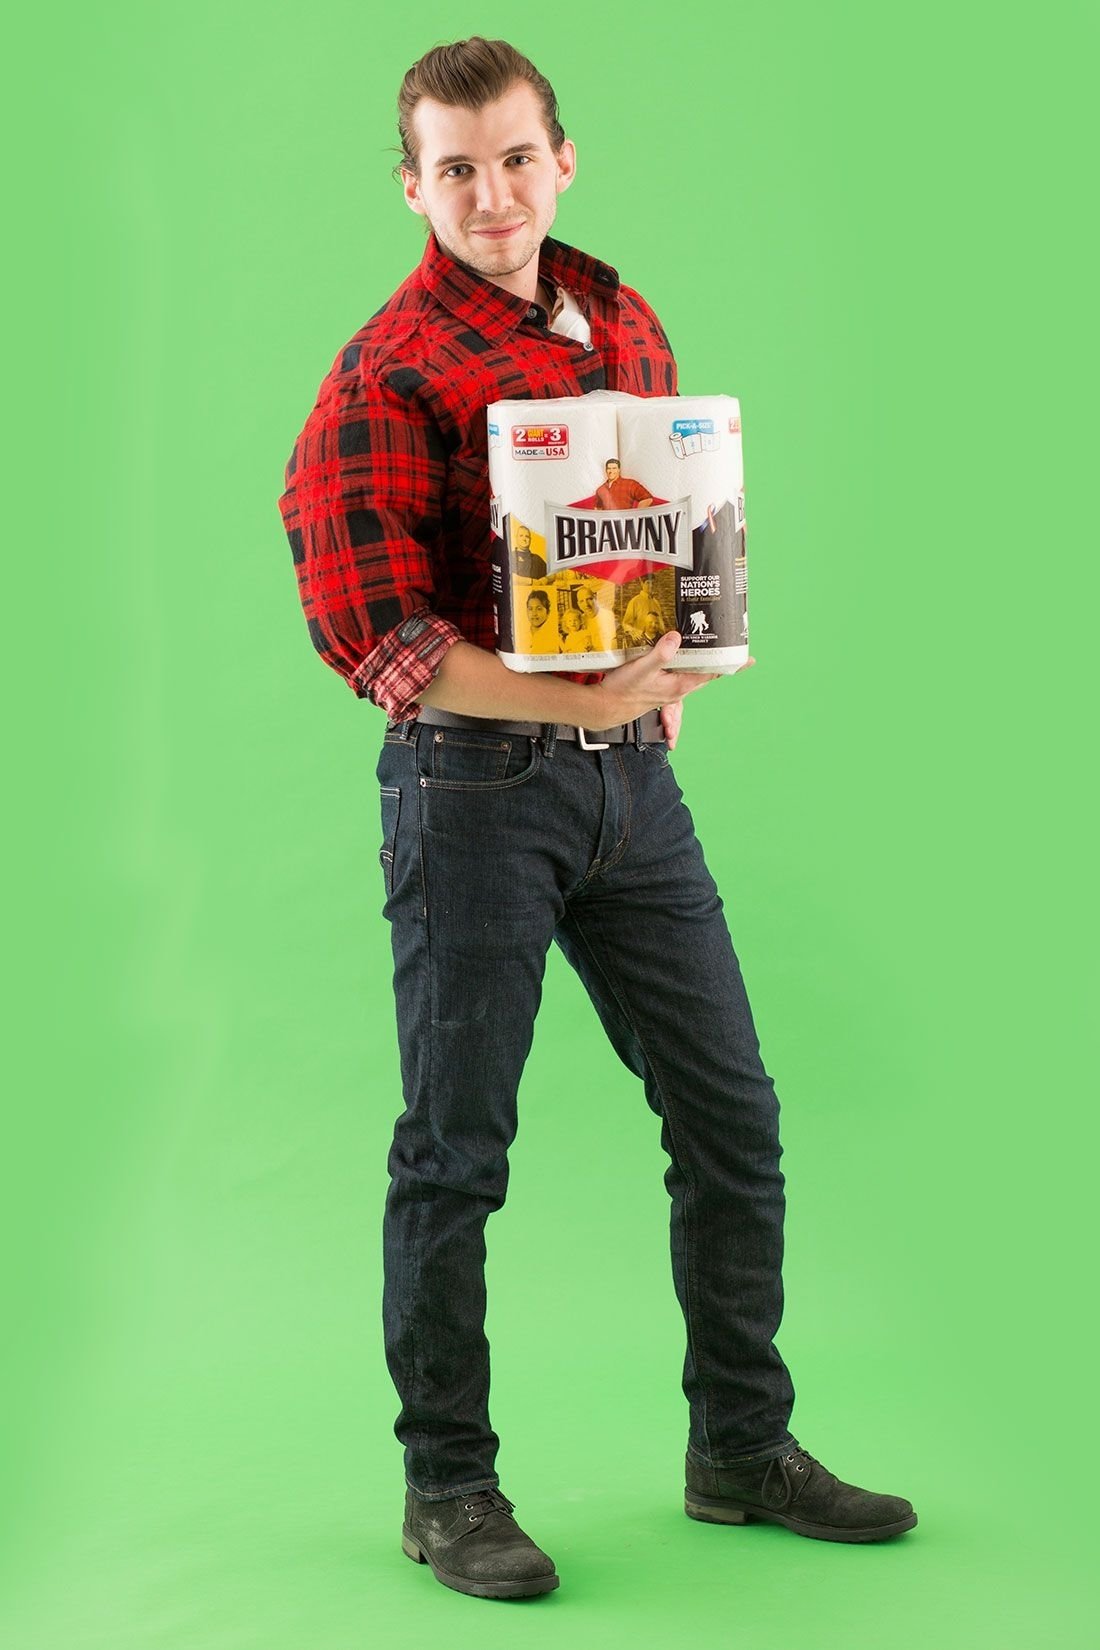 10 Spectacular Good Costume Ideas For Guys all you really need is a flannel shirt to turn into the brawny man 3 2022